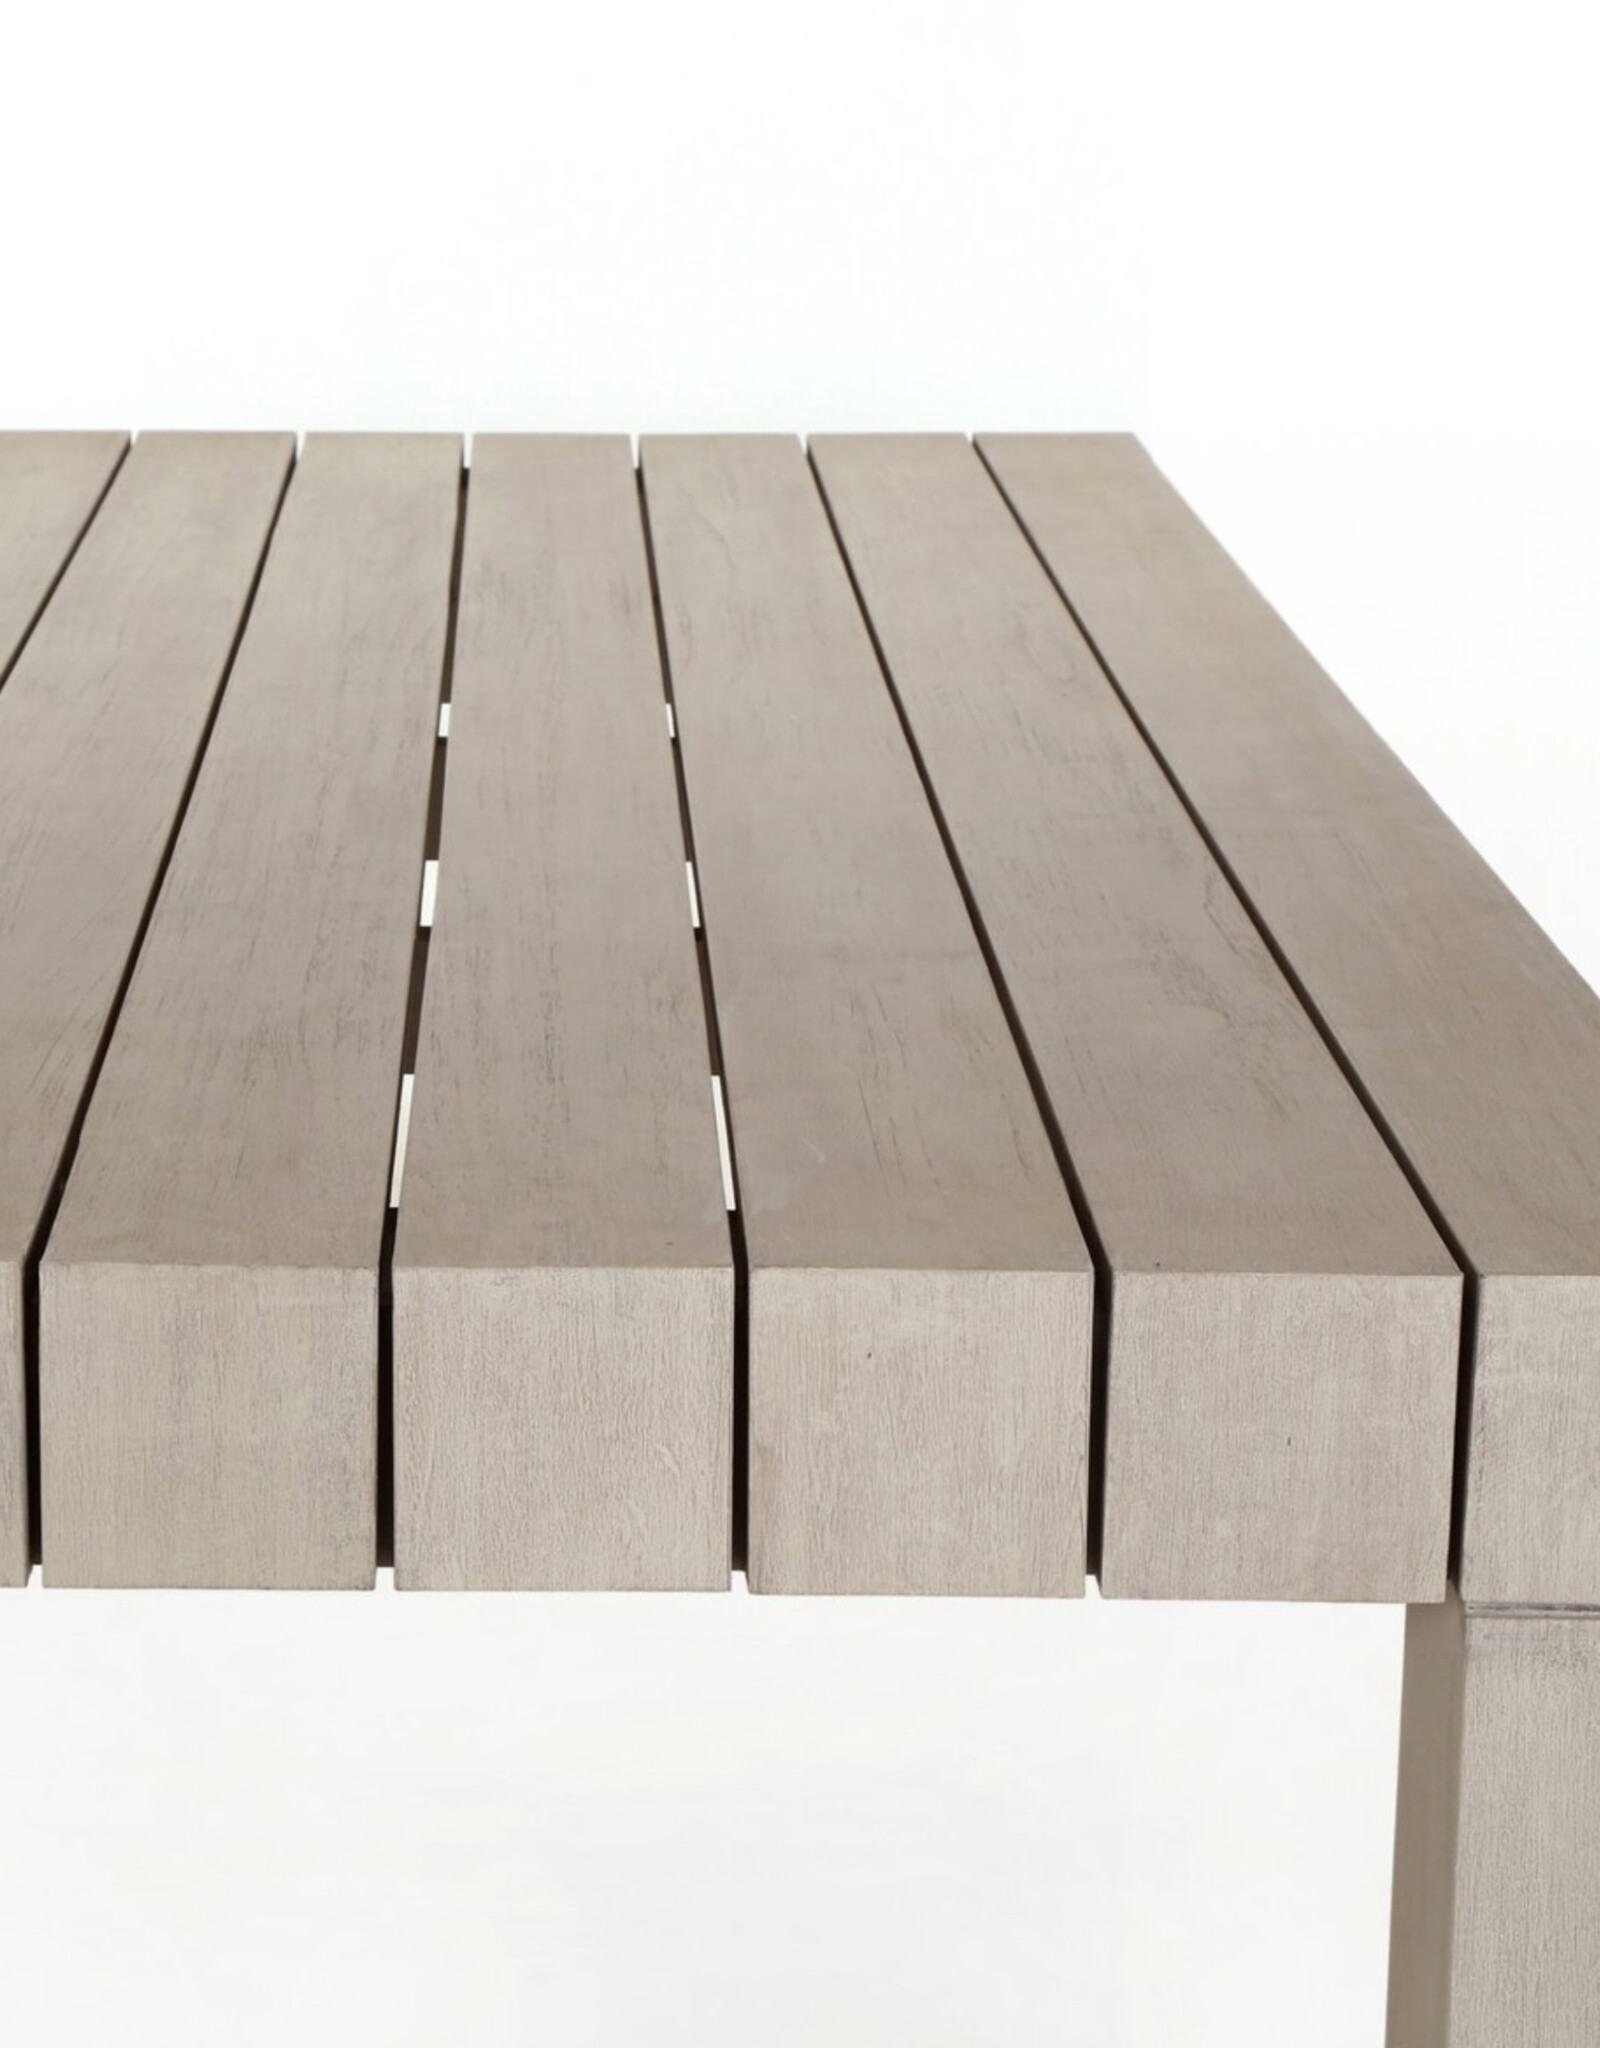 Sonora Outdoor Dining Table Weathered Grey